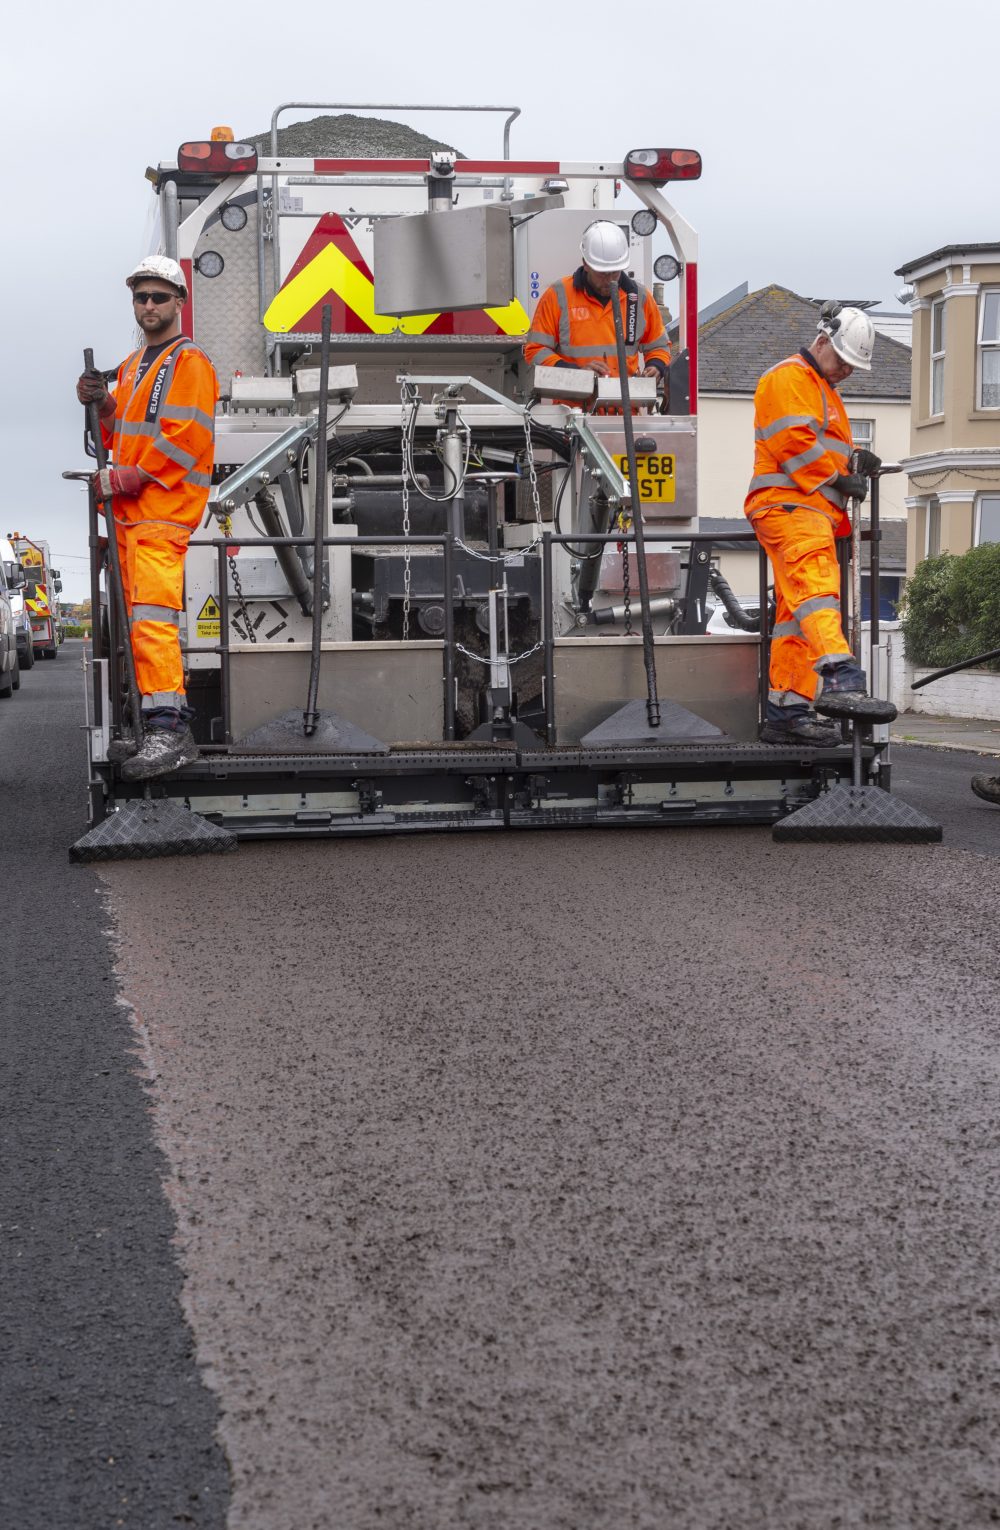 Eurovia Specialist Treatments adds new Breining applicator to Micro Surfacing fleet - Photo by Spencer Griffiths